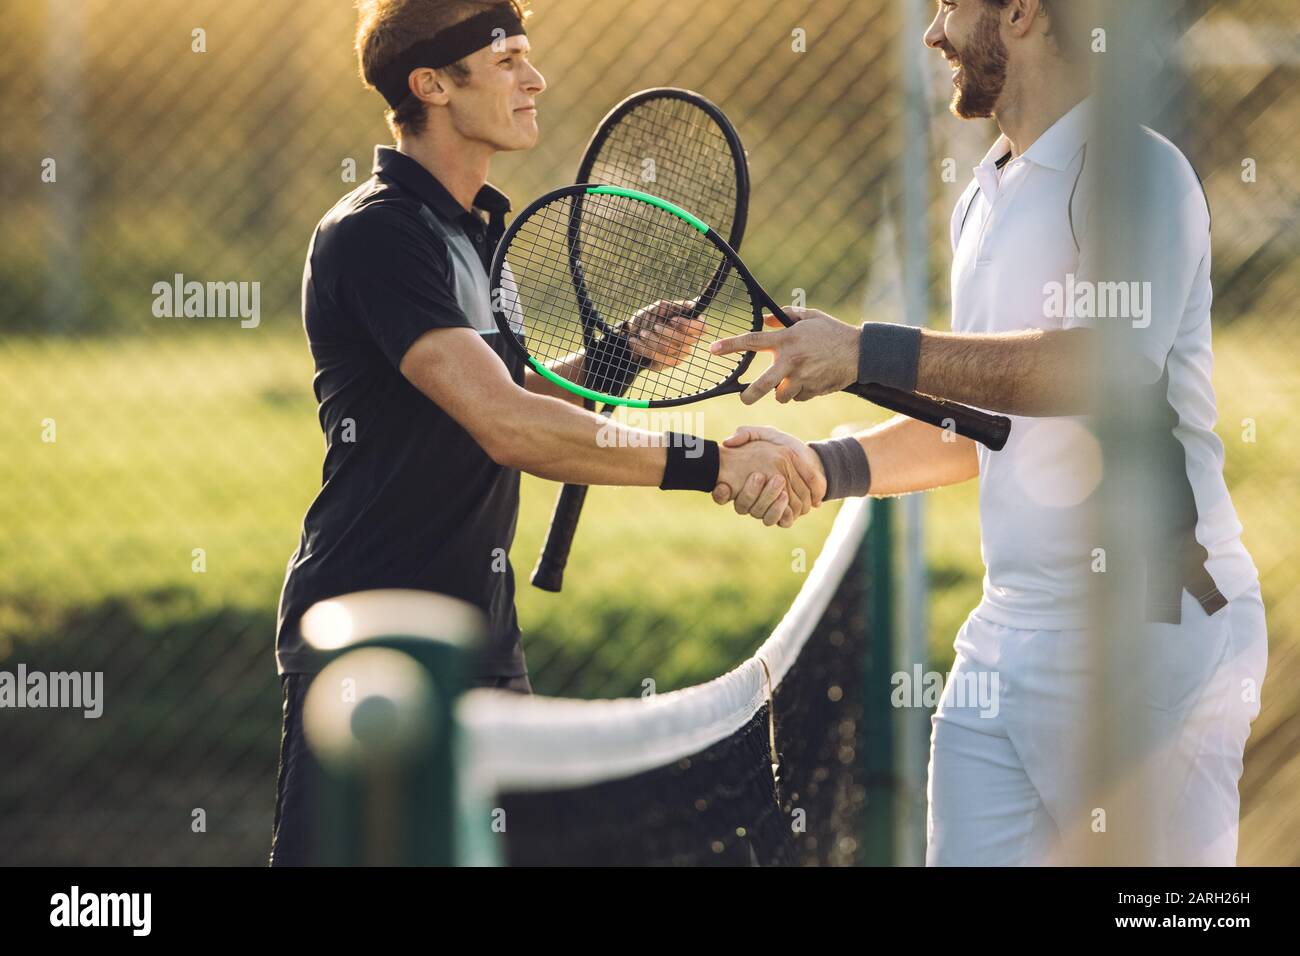 Professional tennis players shaking hands at the net. Two sportsmen shaking hands over the net after the match. Stock Photo